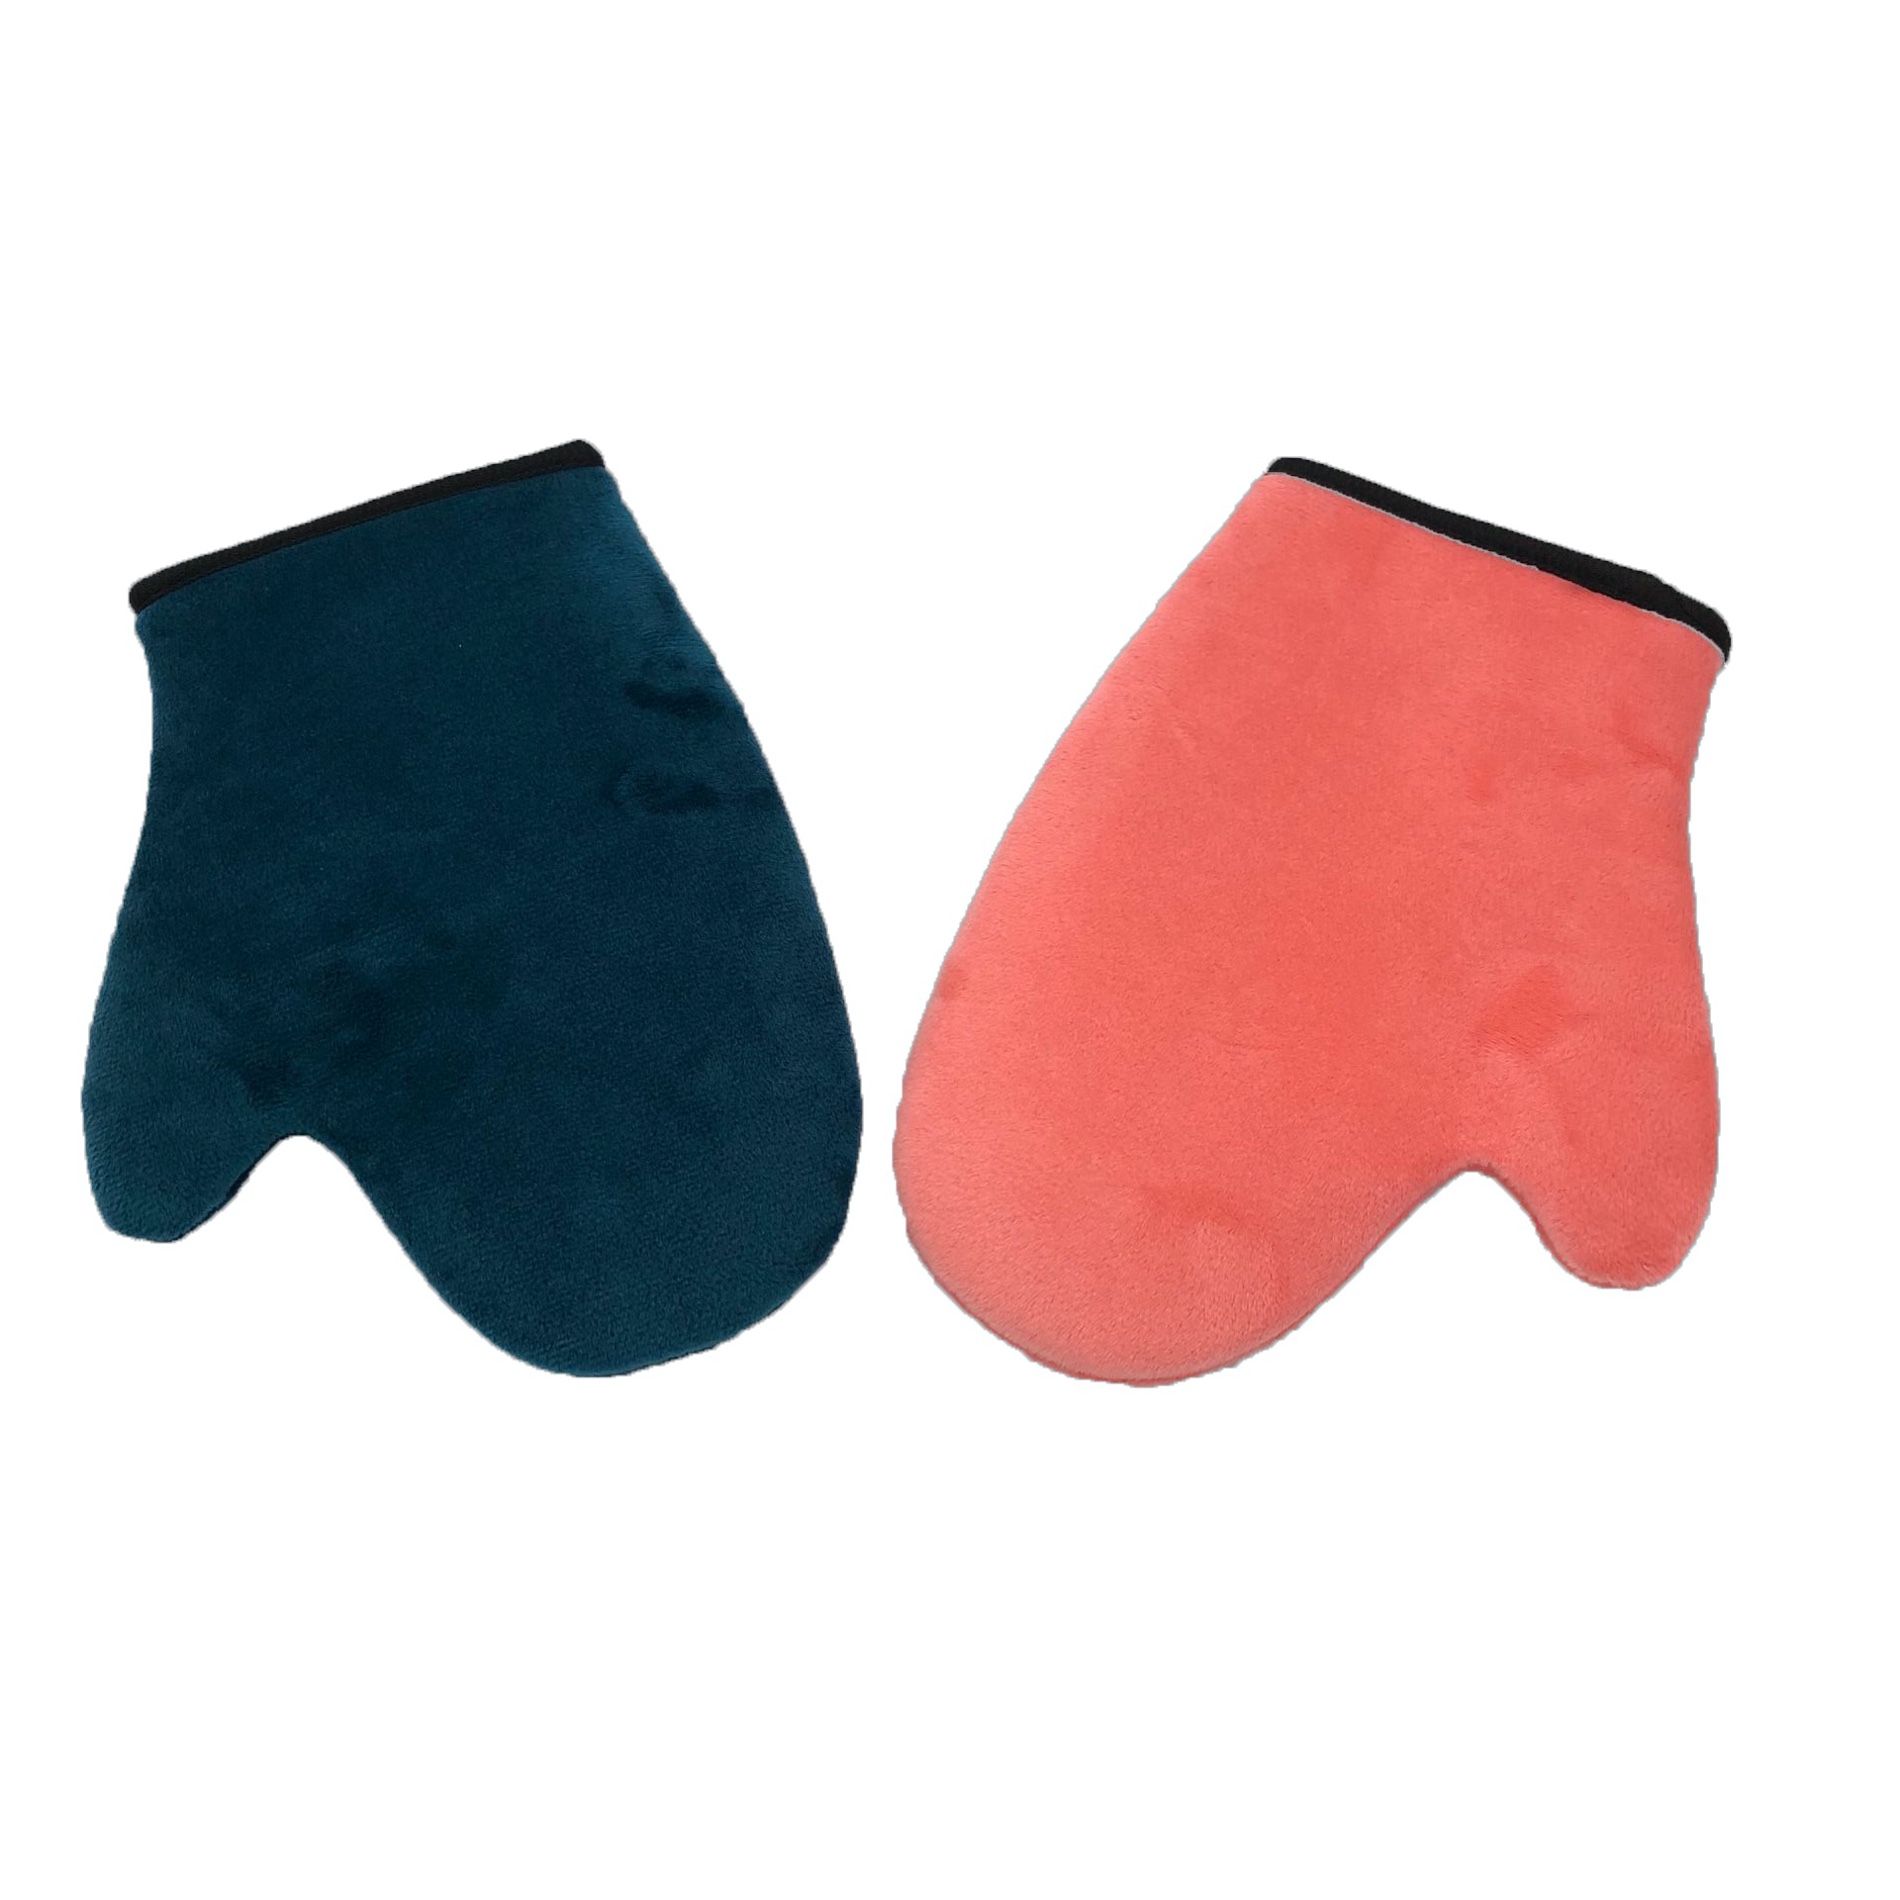 Acquista Lovely The Thumb Applicator Mitts,Lovely The Thumb Applicator Mitts prezzi,Lovely The Thumb Applicator Mitts marche,Lovely The Thumb Applicator Mitts Produttori,Lovely The Thumb Applicator Mitts Citazioni,Lovely The Thumb Applicator Mitts  l'azienda,